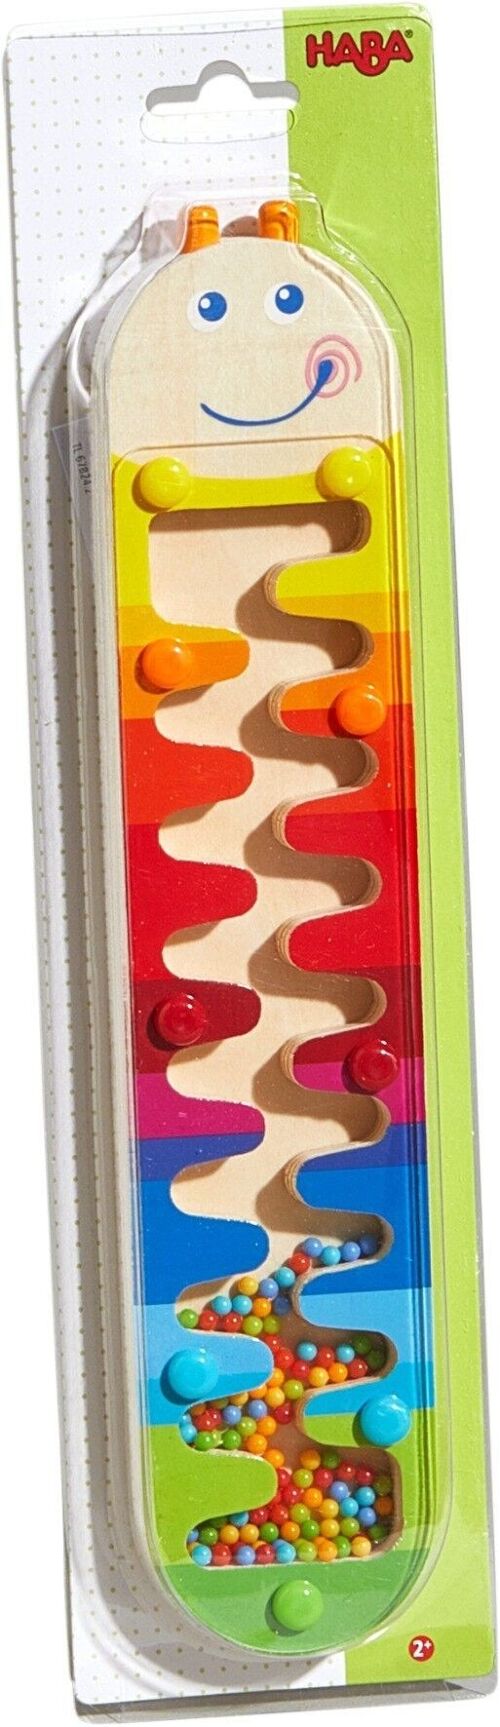 HABA Rainmaker Wormy - Wooden Toy